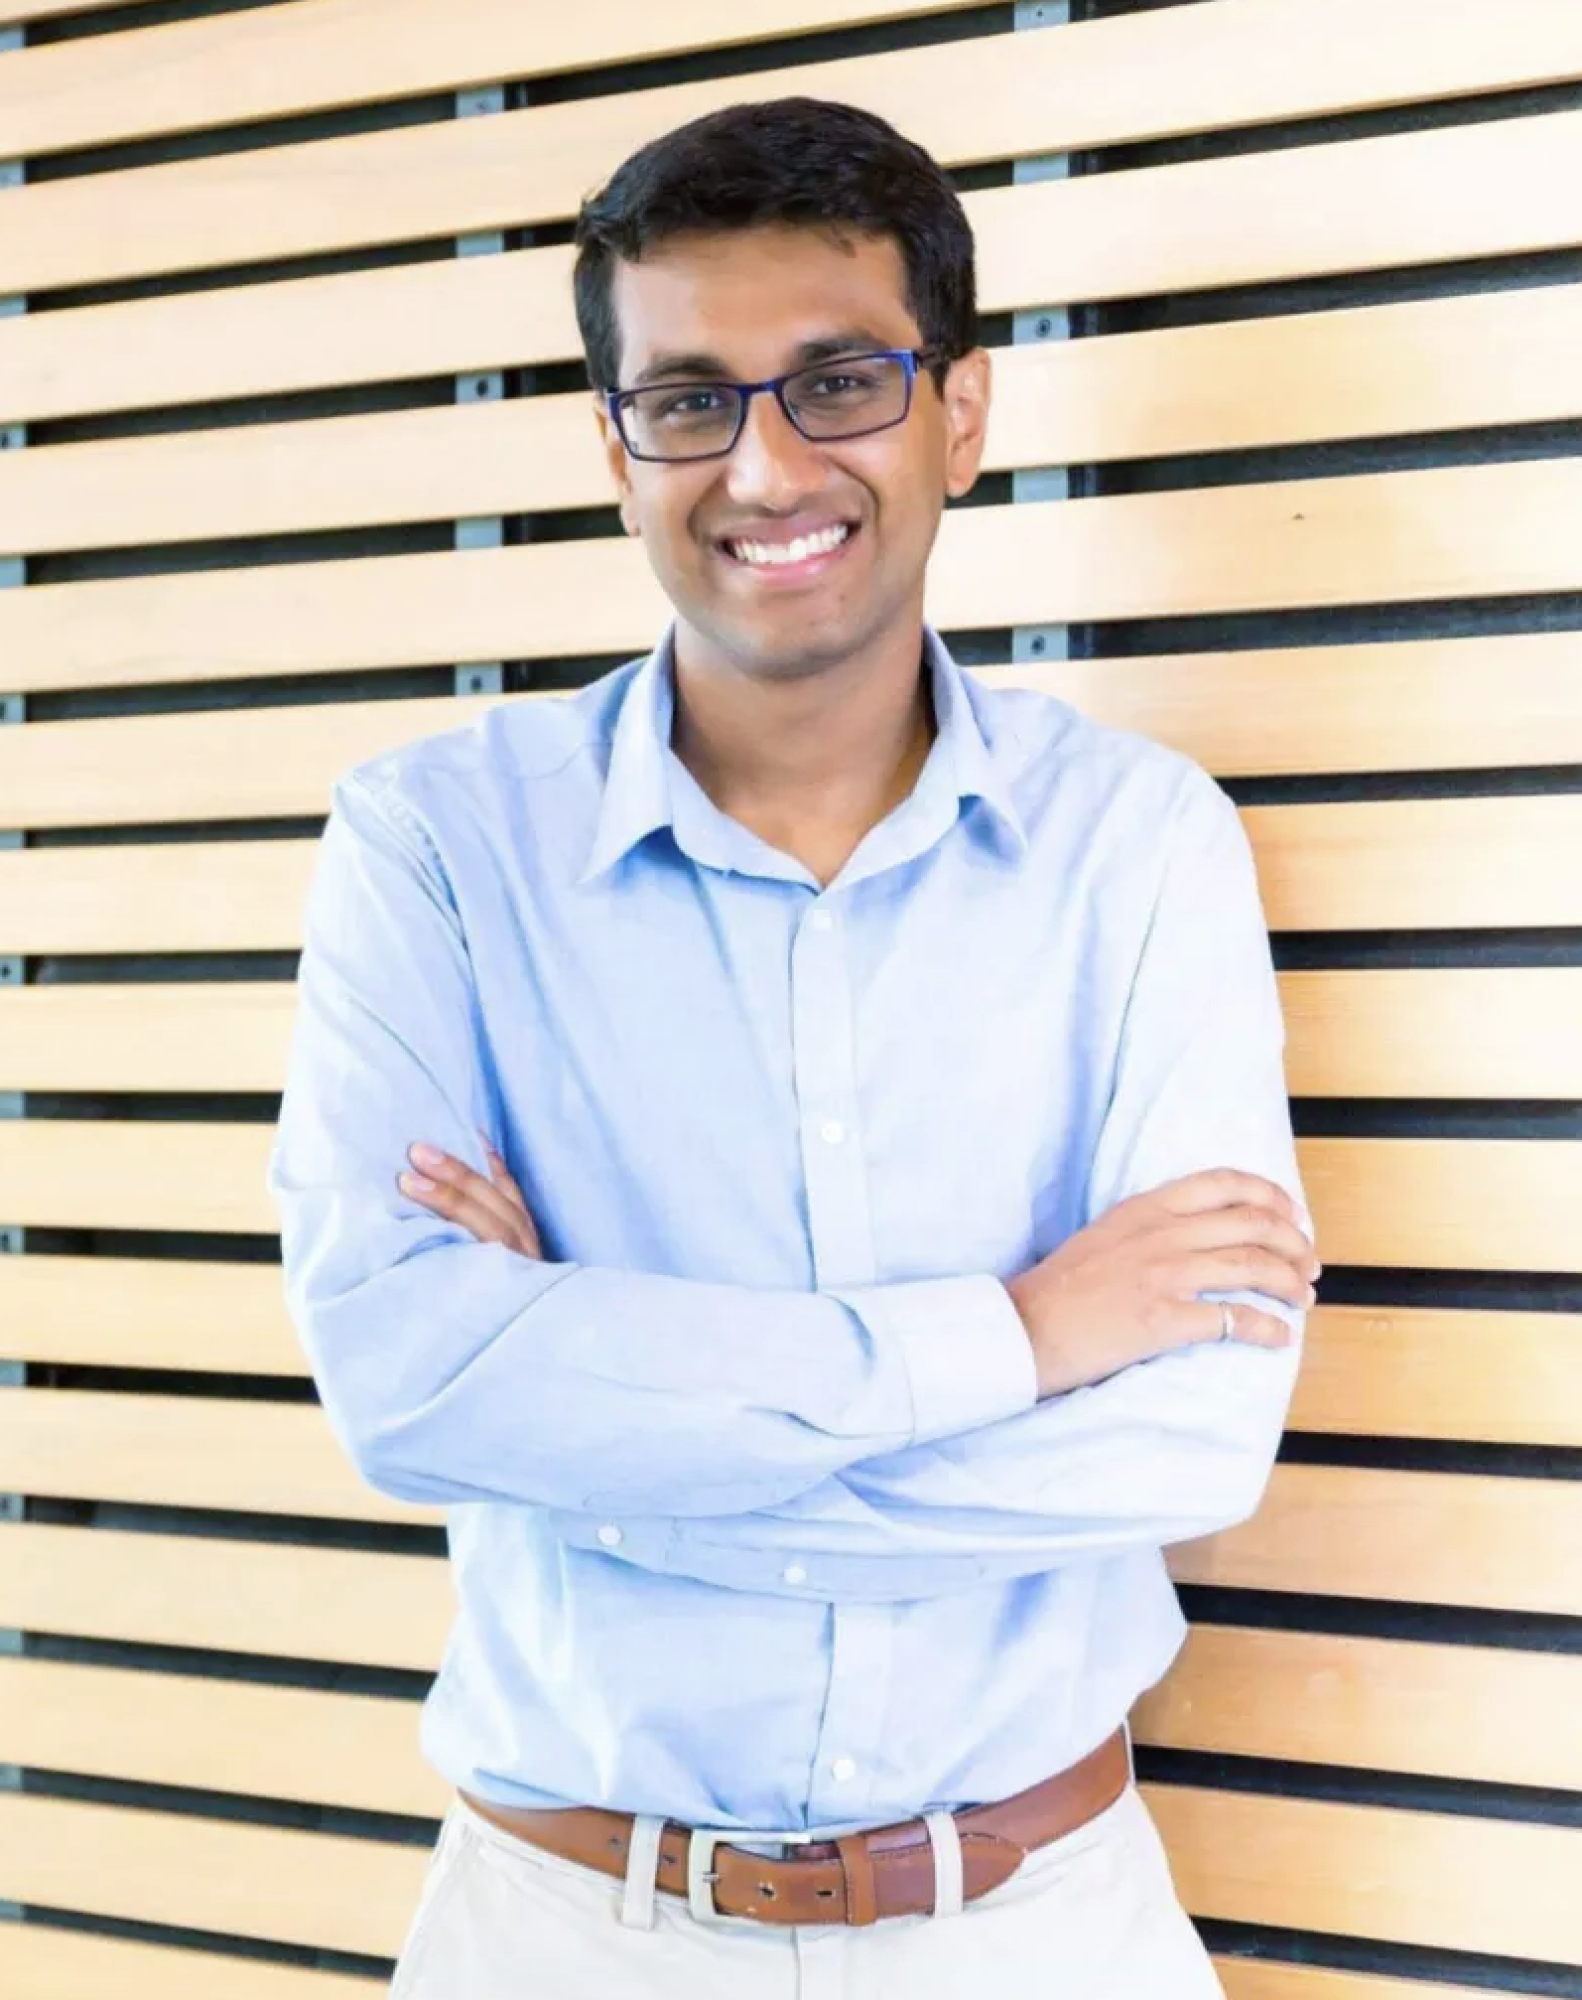 Raaj Chatterjee, co-founder and CEO of MeaningfulWork